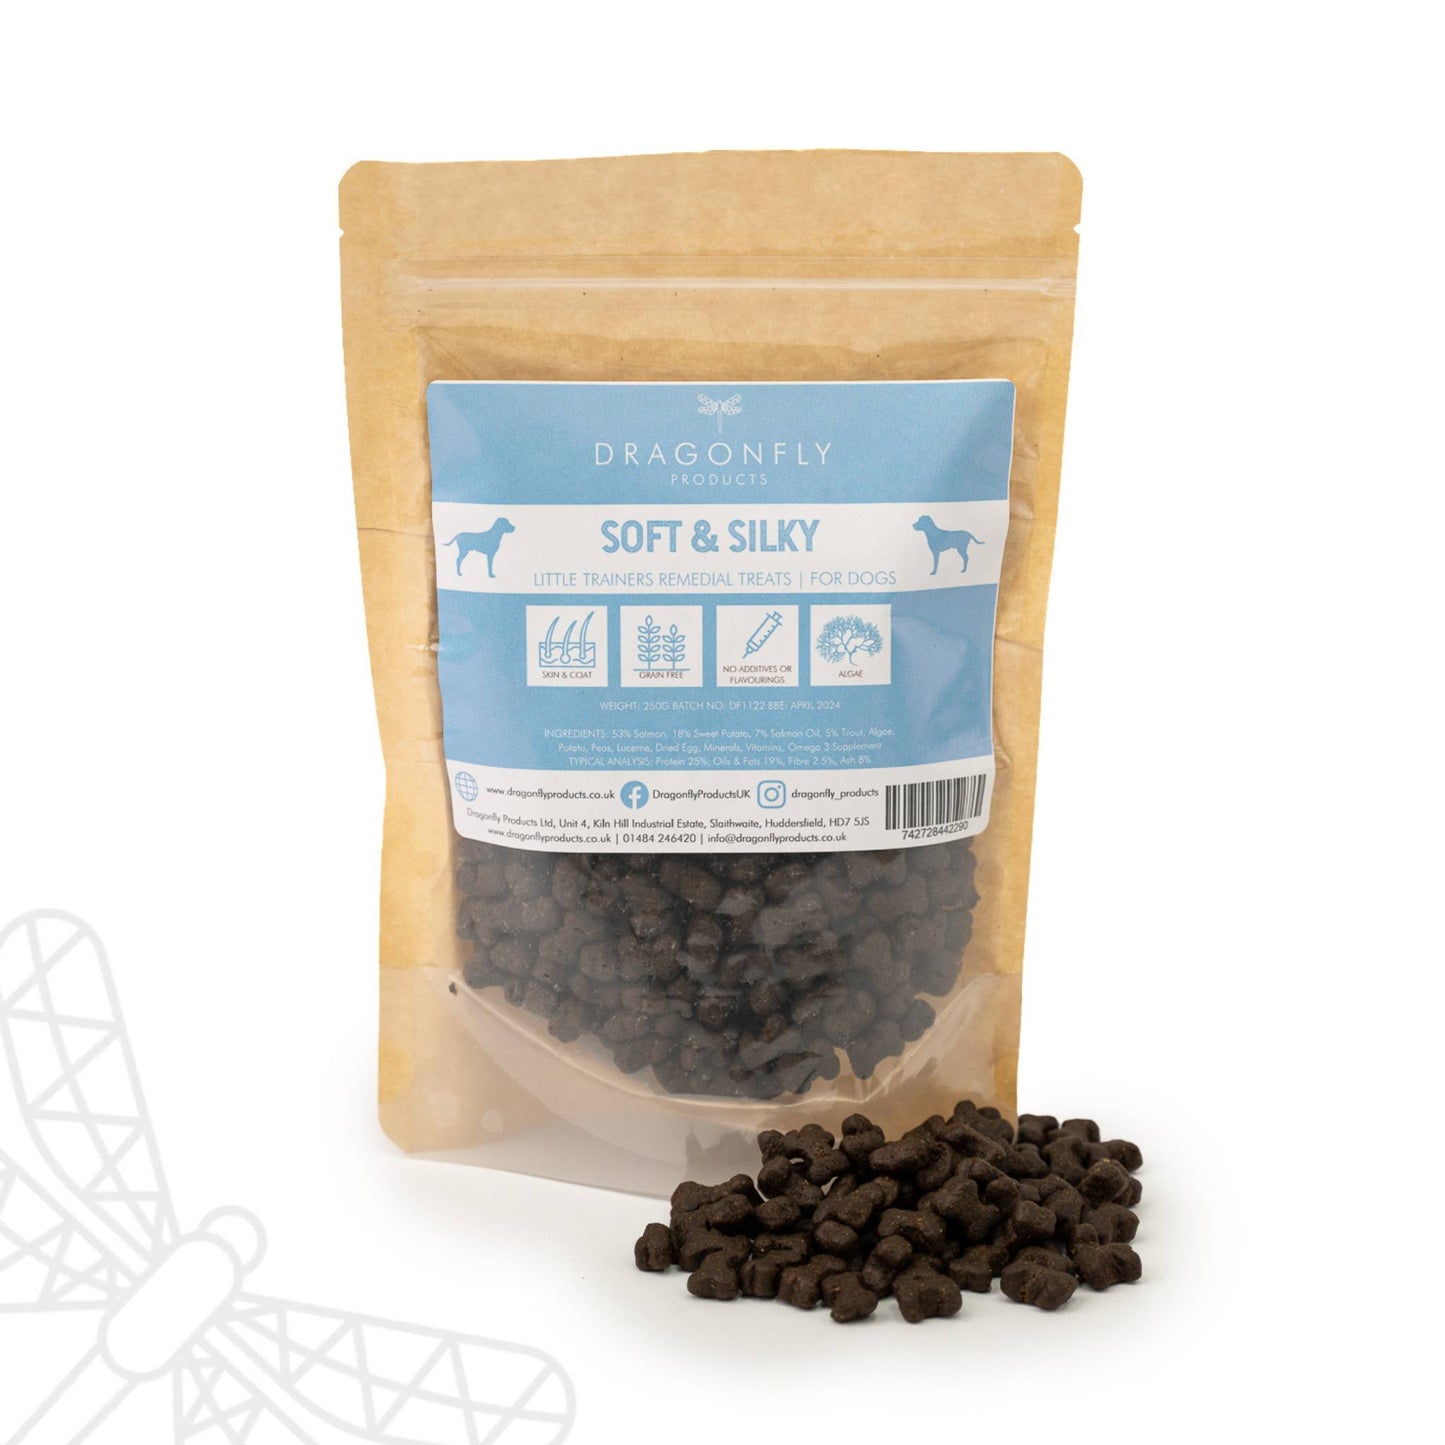 Skin and coat natural treats for dogs